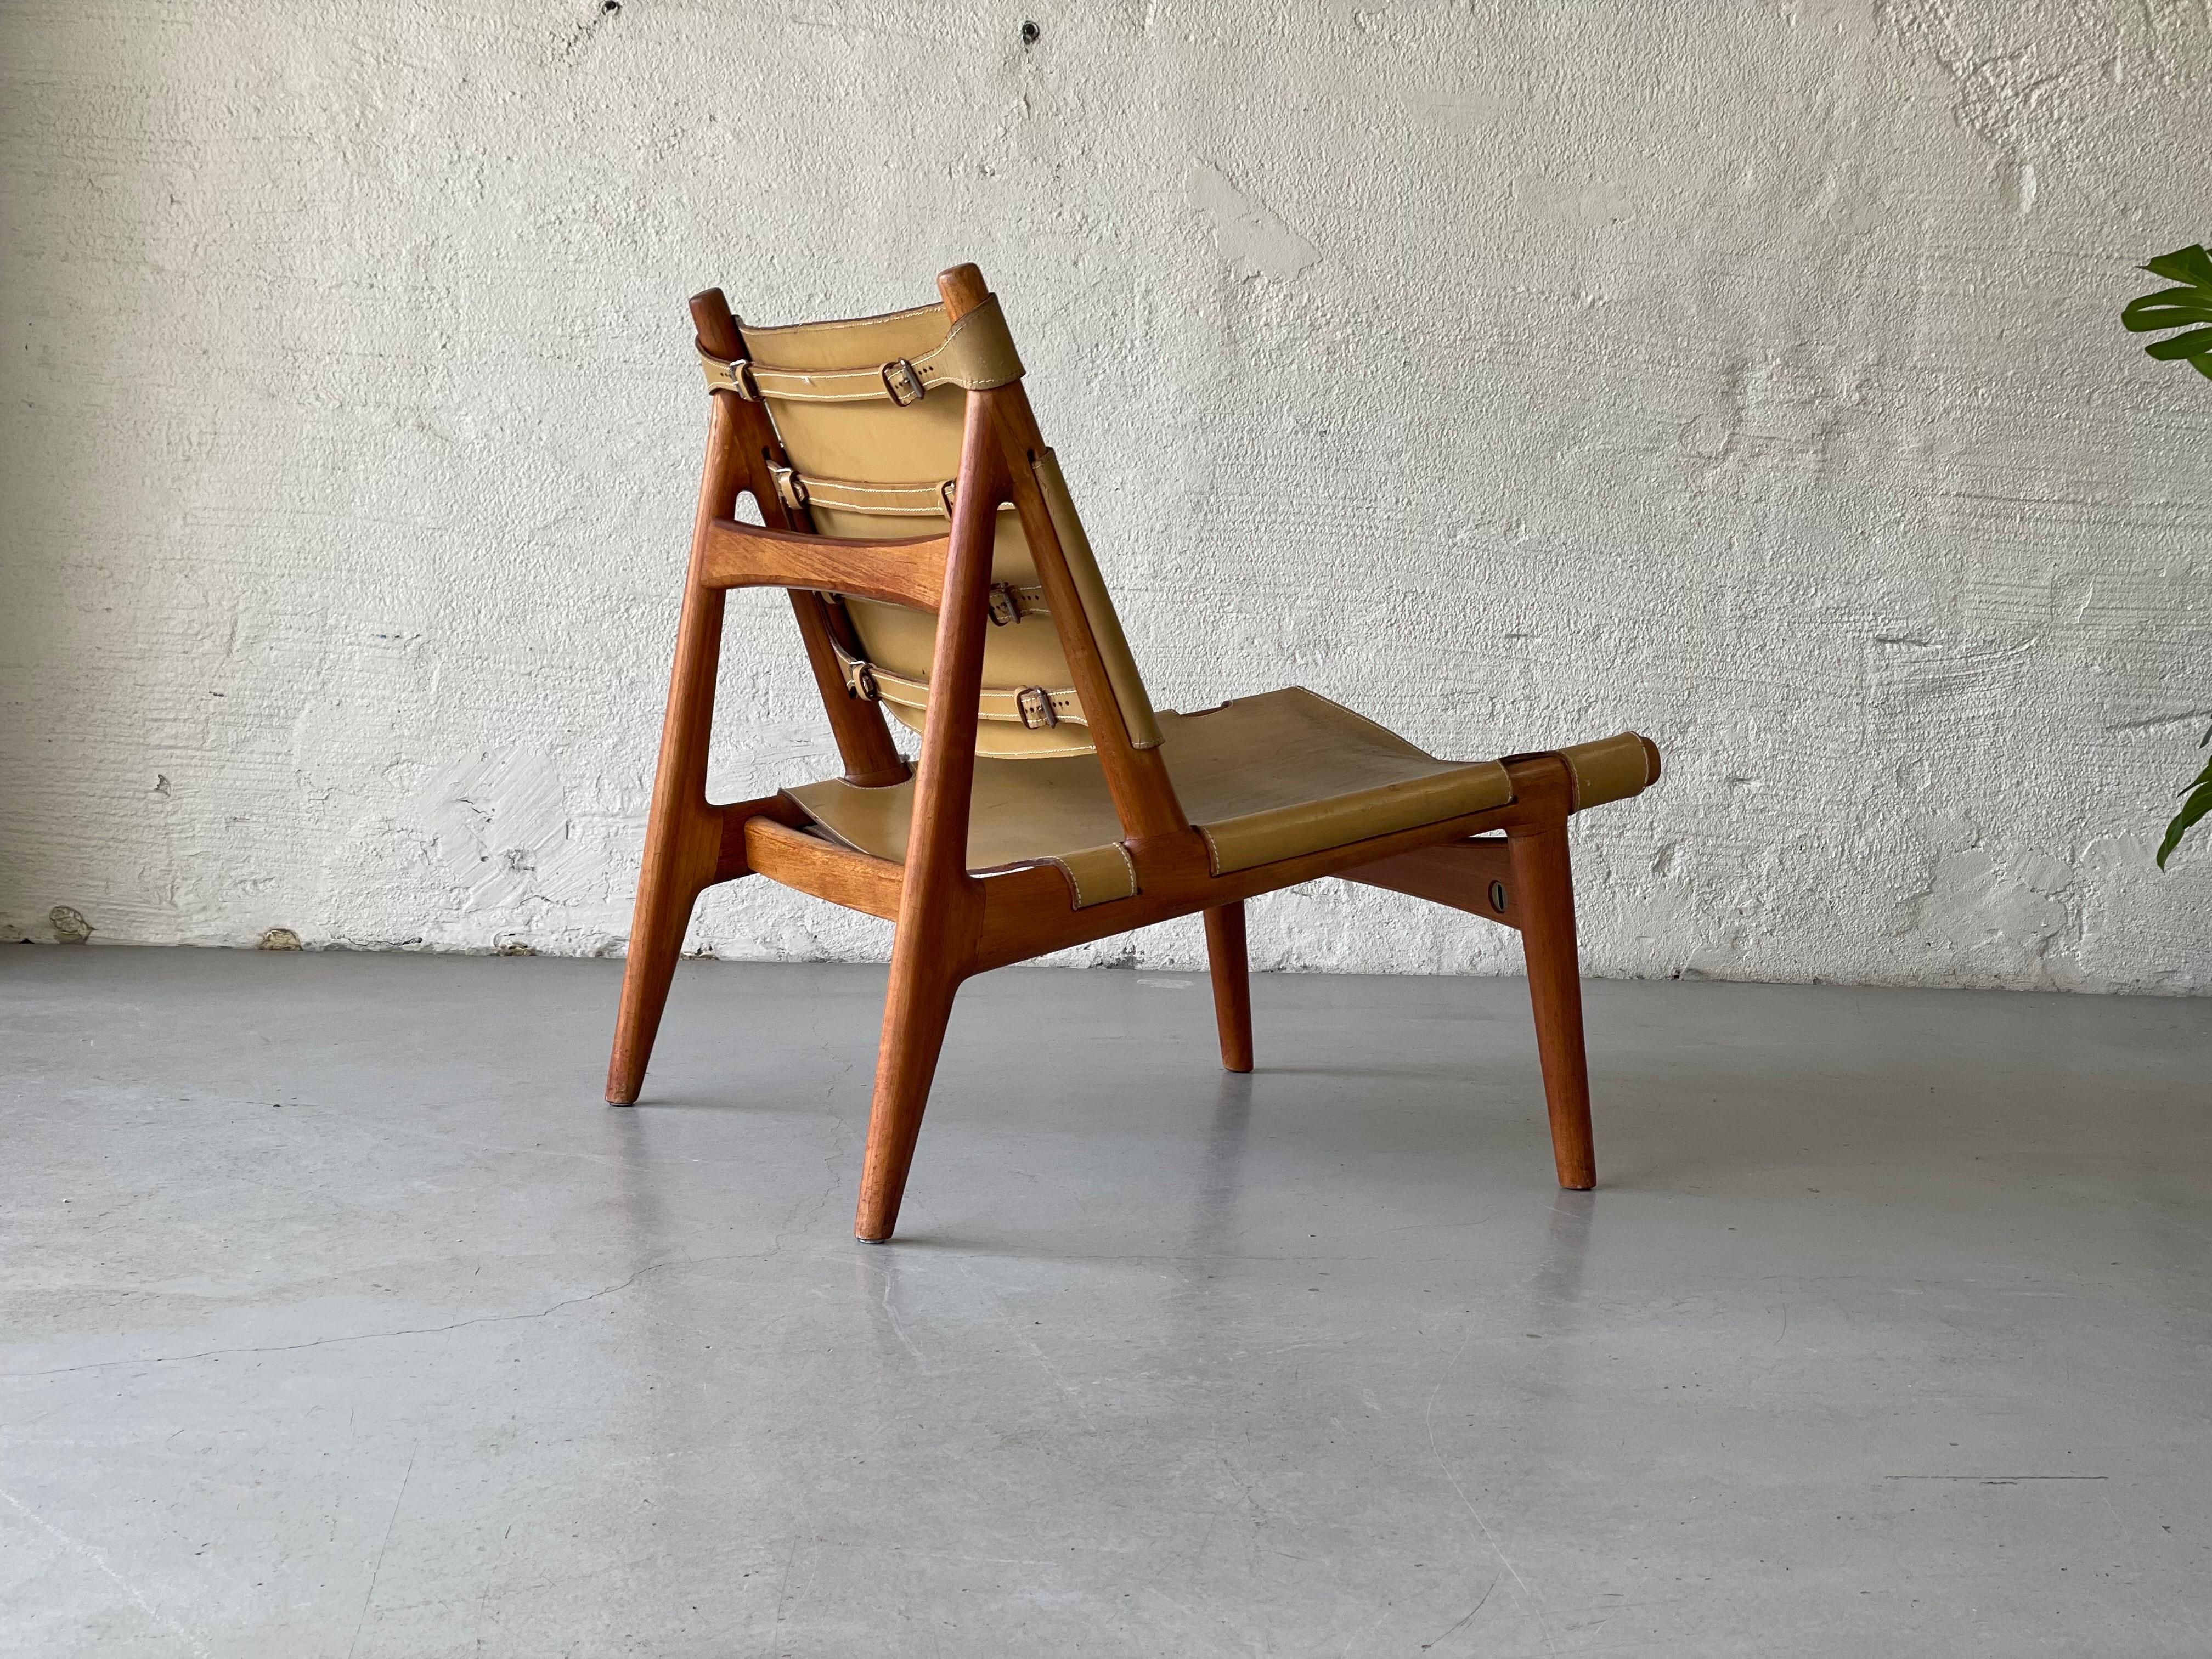 A unique chance to get, one of a few existing, Torbjørn Afdals Hunter Chair.

The Mid-Century Modern design movement has given us some of the most iconic furniture designs the world has ever seen. One such classic piece emerging from this design